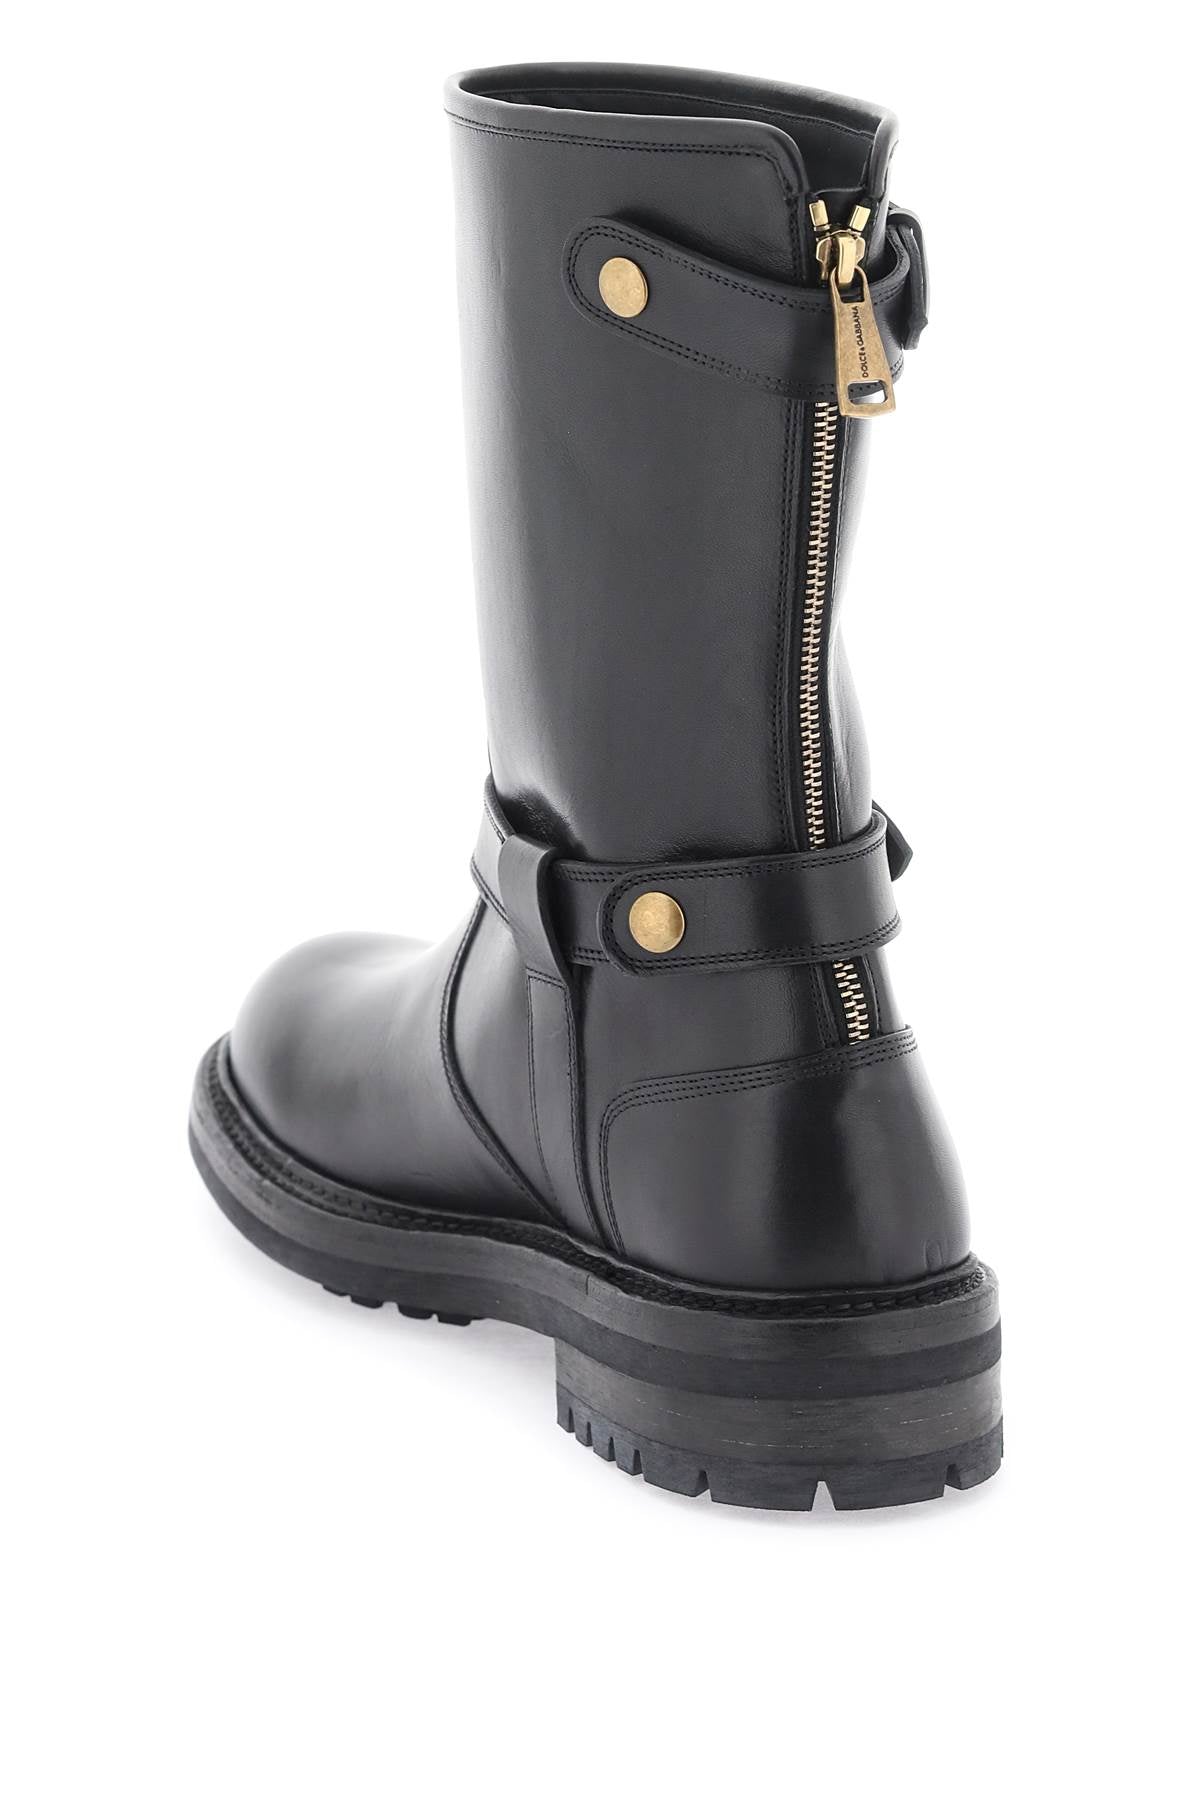 DOLCE & GABBANA Men's Black Leather Biker Boots from the FW23 Collection